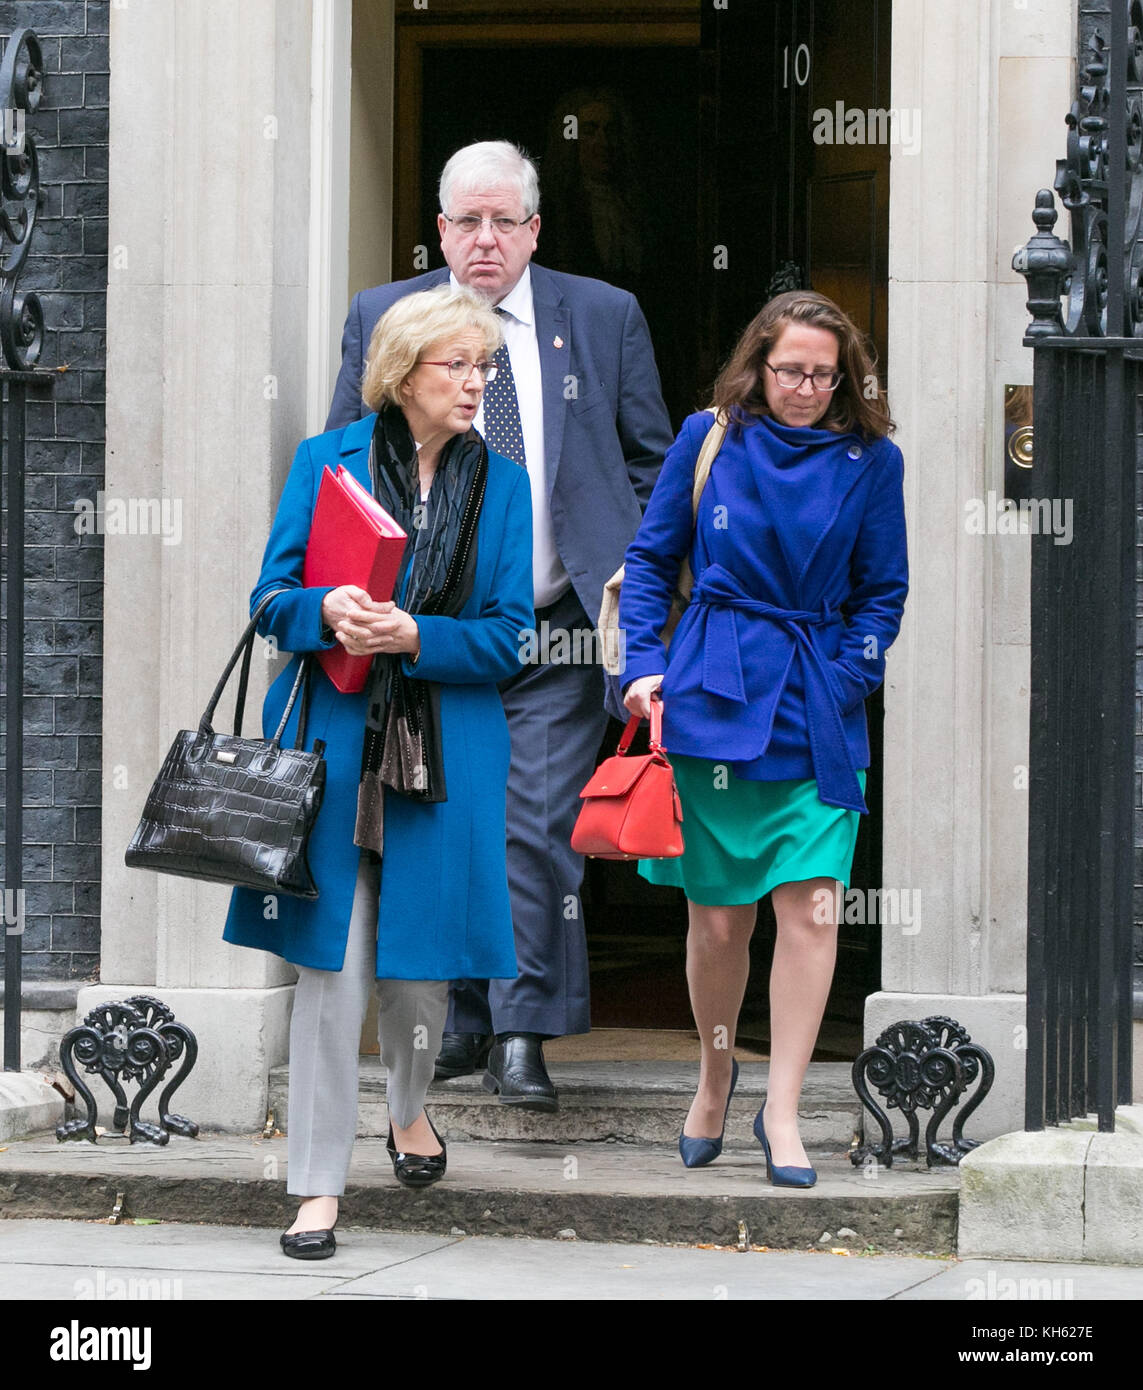 Downign Street. London, UK. 14th Nov, 2017. Andrea Leadsom, Lord President of the Council, and Leader of the House of Commons, Baroness Evans of Bowes Park, Lord Privy Seal, and Leader of the House of Lords and Sir Patrick McLoughlin, Chancellor of the Duchy of Lancaster departs from No 10 Downing Street after attending the weekly Cabinet Meeting. Credit: Dinendra Haria/Alamy Live News Stock Photo